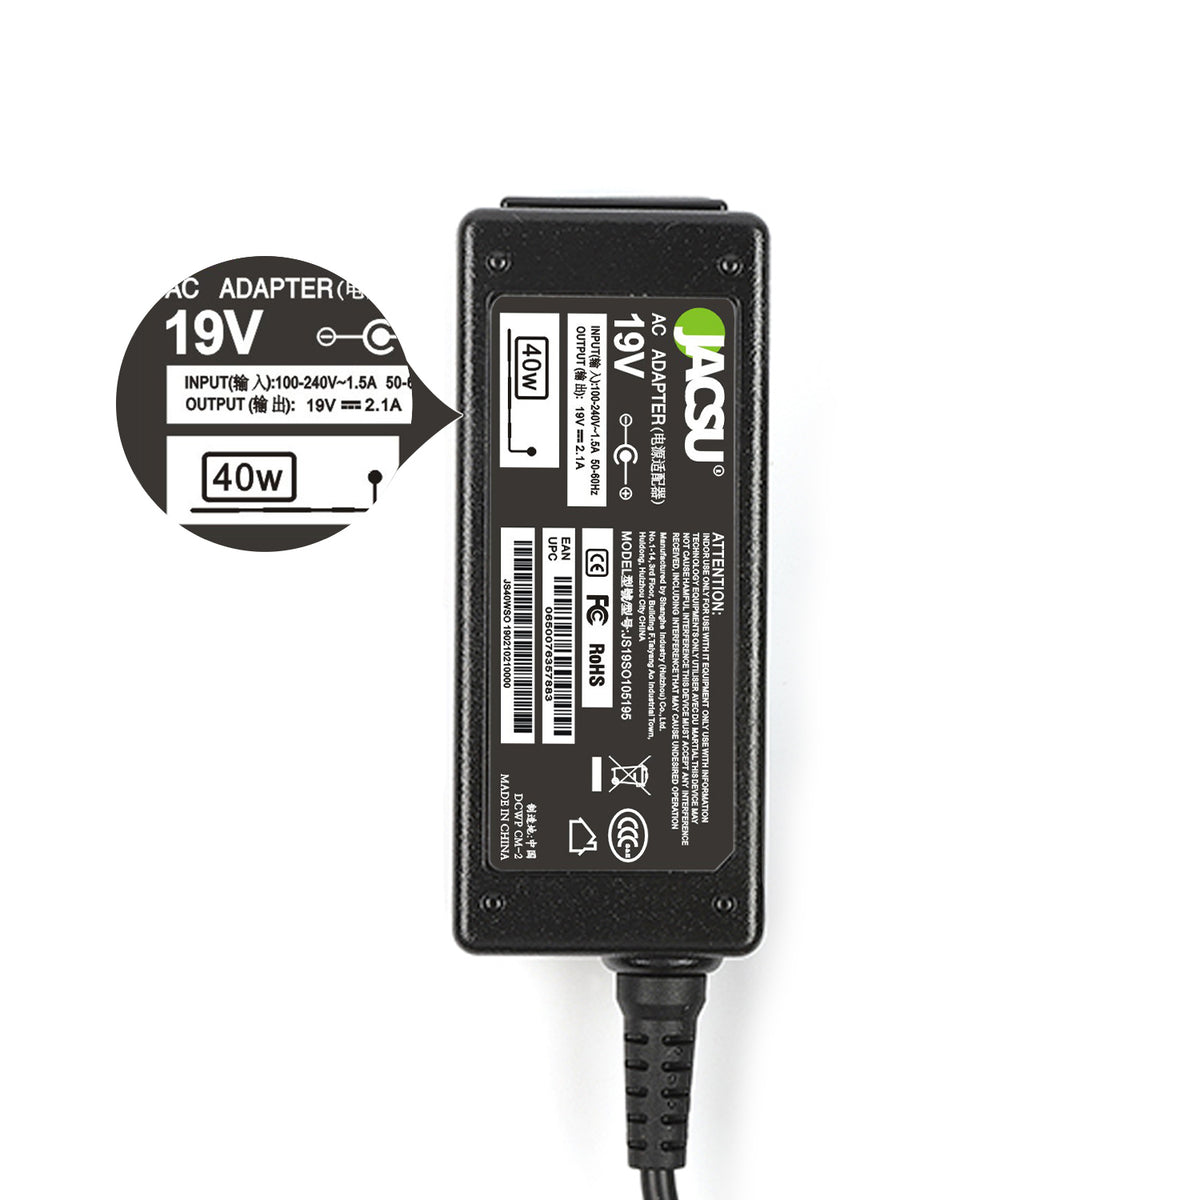 Jacsu 19V 2.1A 2.5x0.7 40W Laptop Charger Adapter For Asus Eee PC 1001 1001P 1005 1005HAB 1008HA 1011PX 1015PW 1015PX